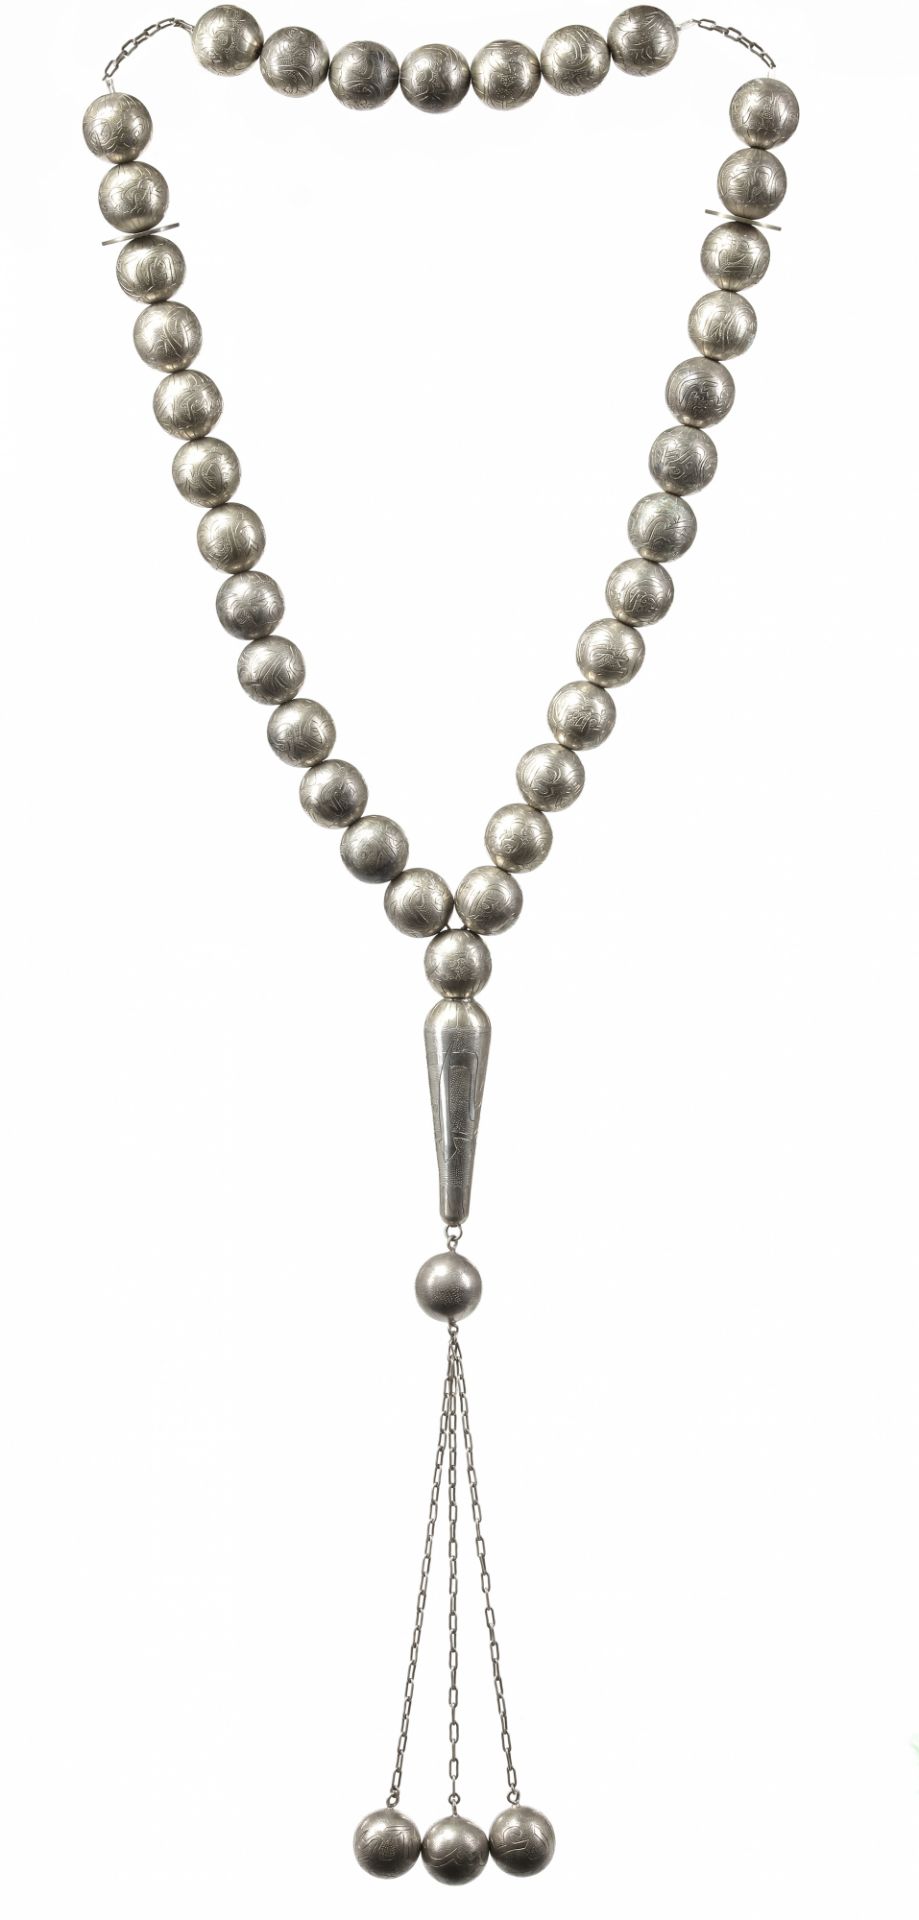 LARGE OTTOMAN SILVER PRAYER BEADS, LATE 19TH CENTURY - Image 3 of 12